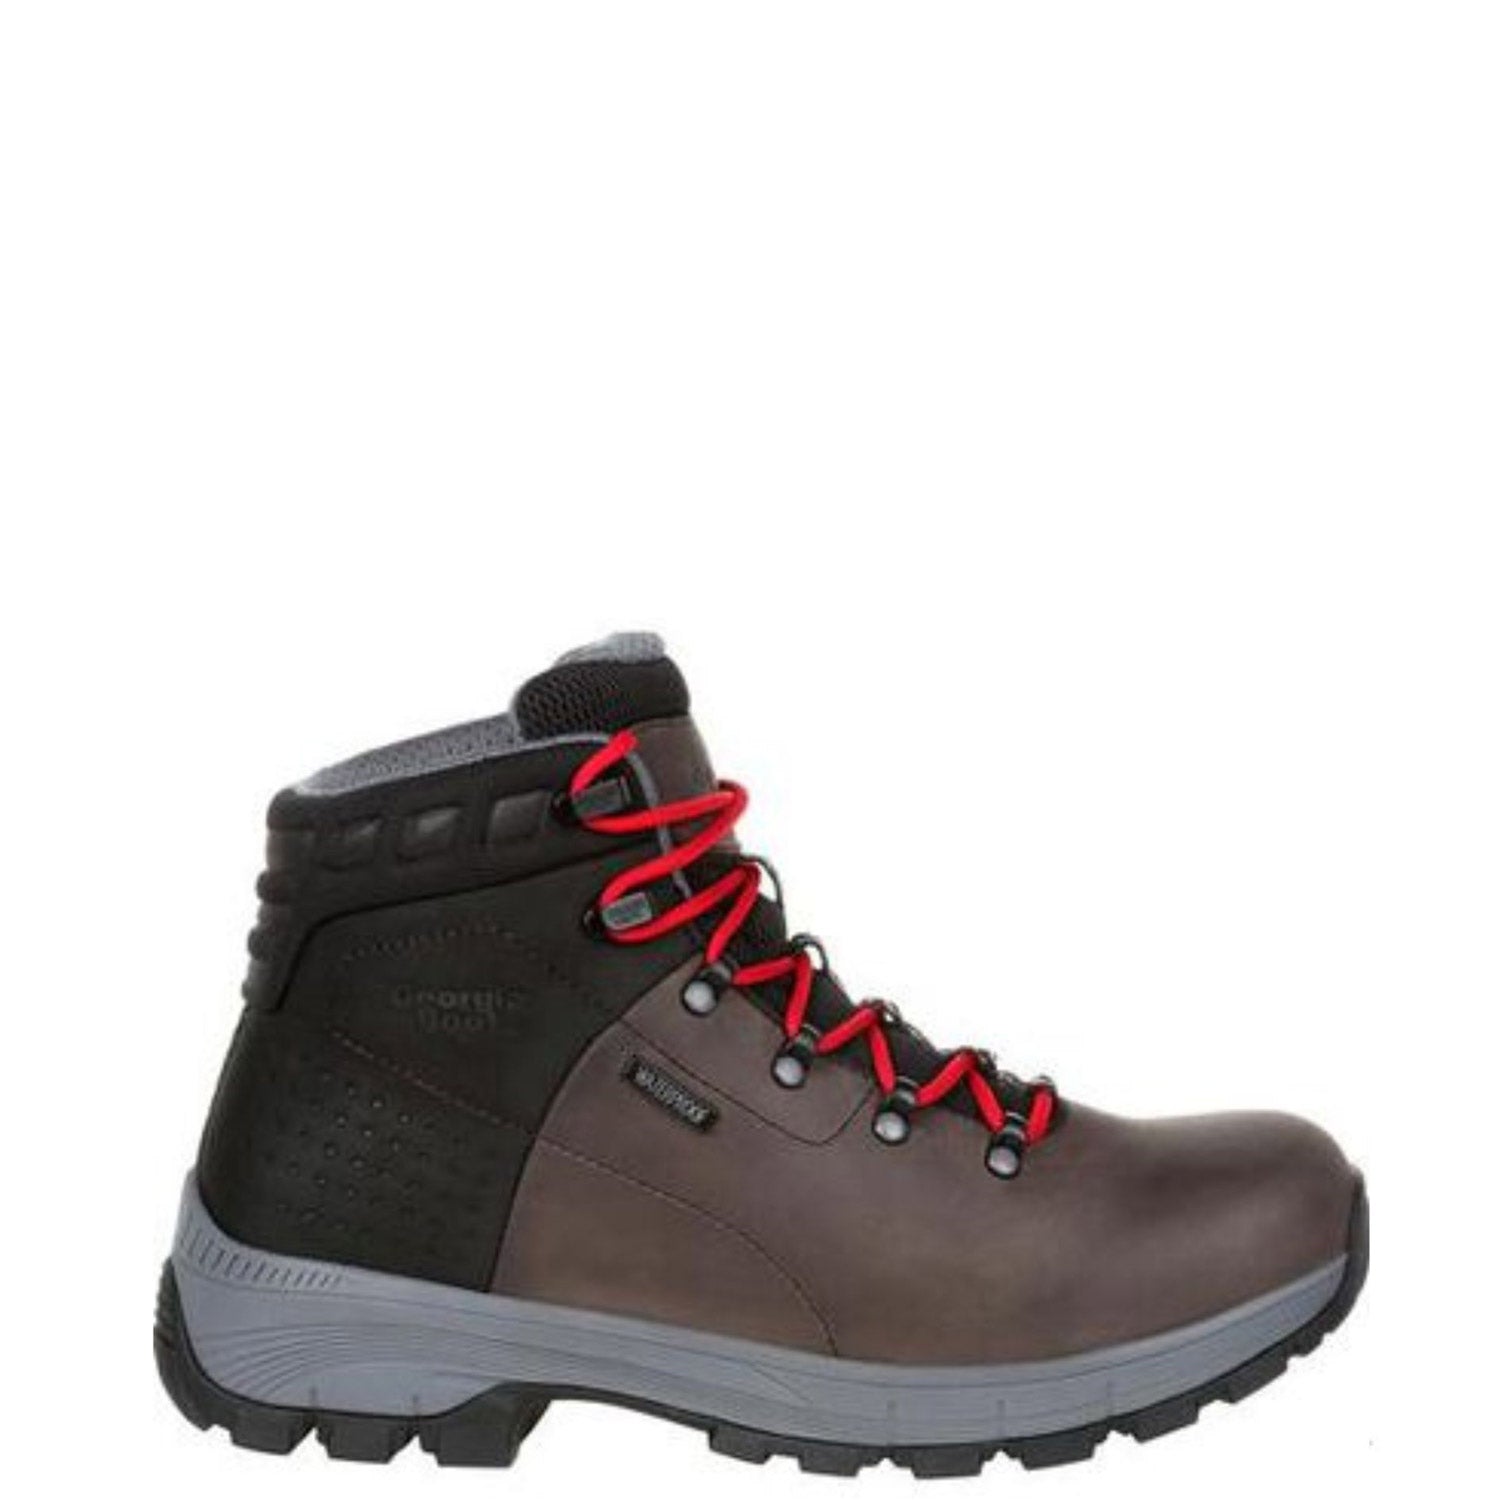 Georgia Boot Men's Eagle Trail 6" Waterproof EH Alloy Toe Work Boot - Work World - Workwear, Work Boots, Safety Gear